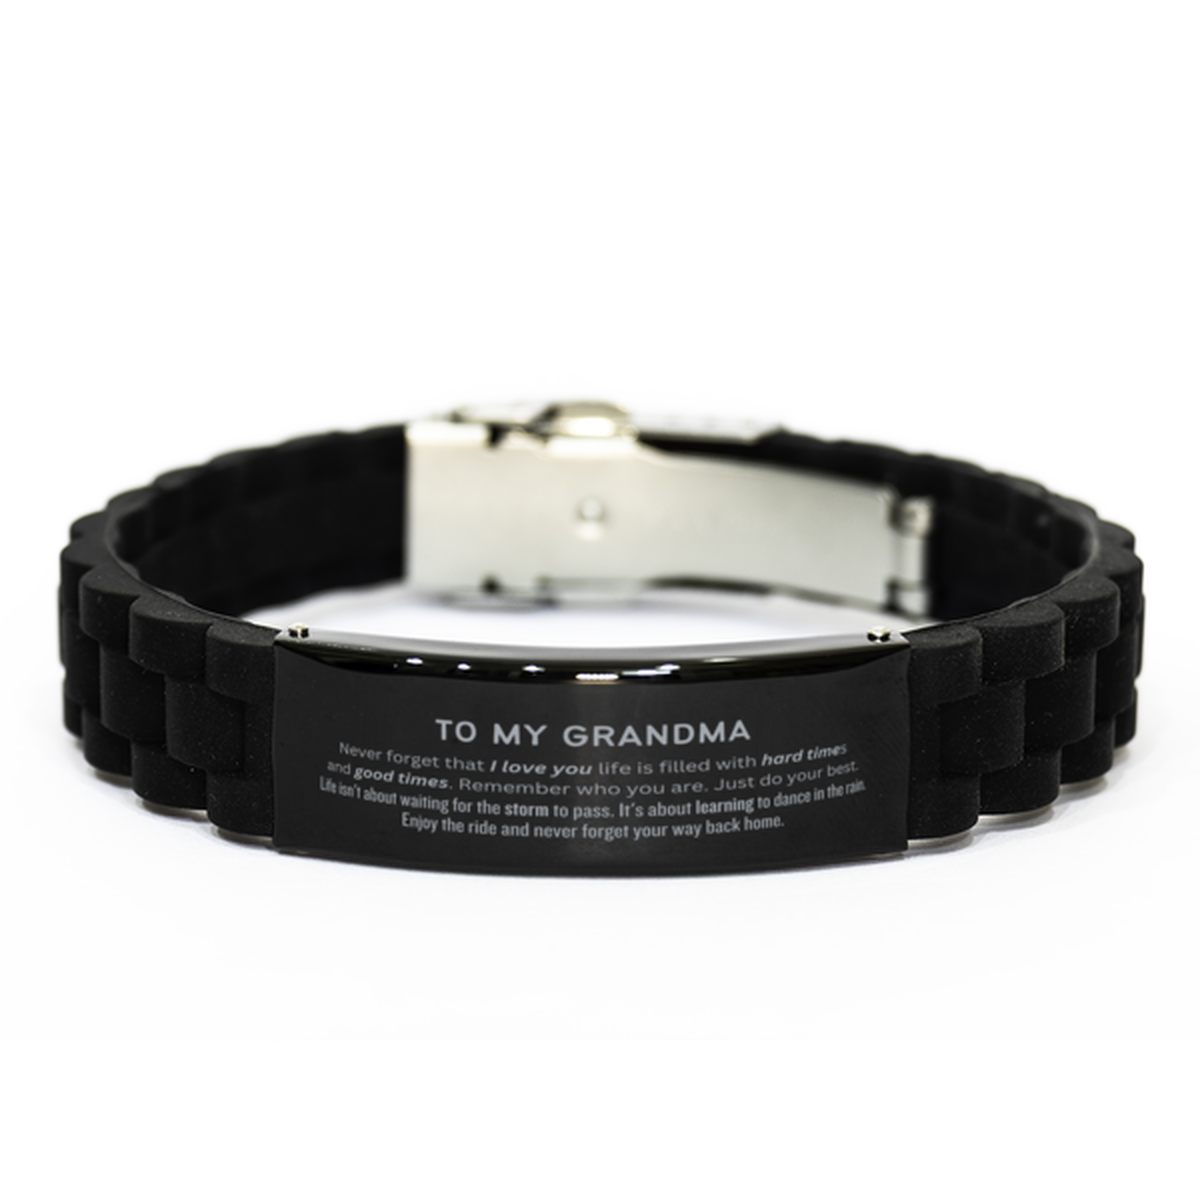 Christmas Grandma Black Glidelock Clasp Bracelet Gifts, To My Grandma Birthday Thank You Gifts For Grandma, Graduation Unique Gifts For Grandma To My Grandma Never forget that I love you life is filled with hard times and good times. Remember who you are.